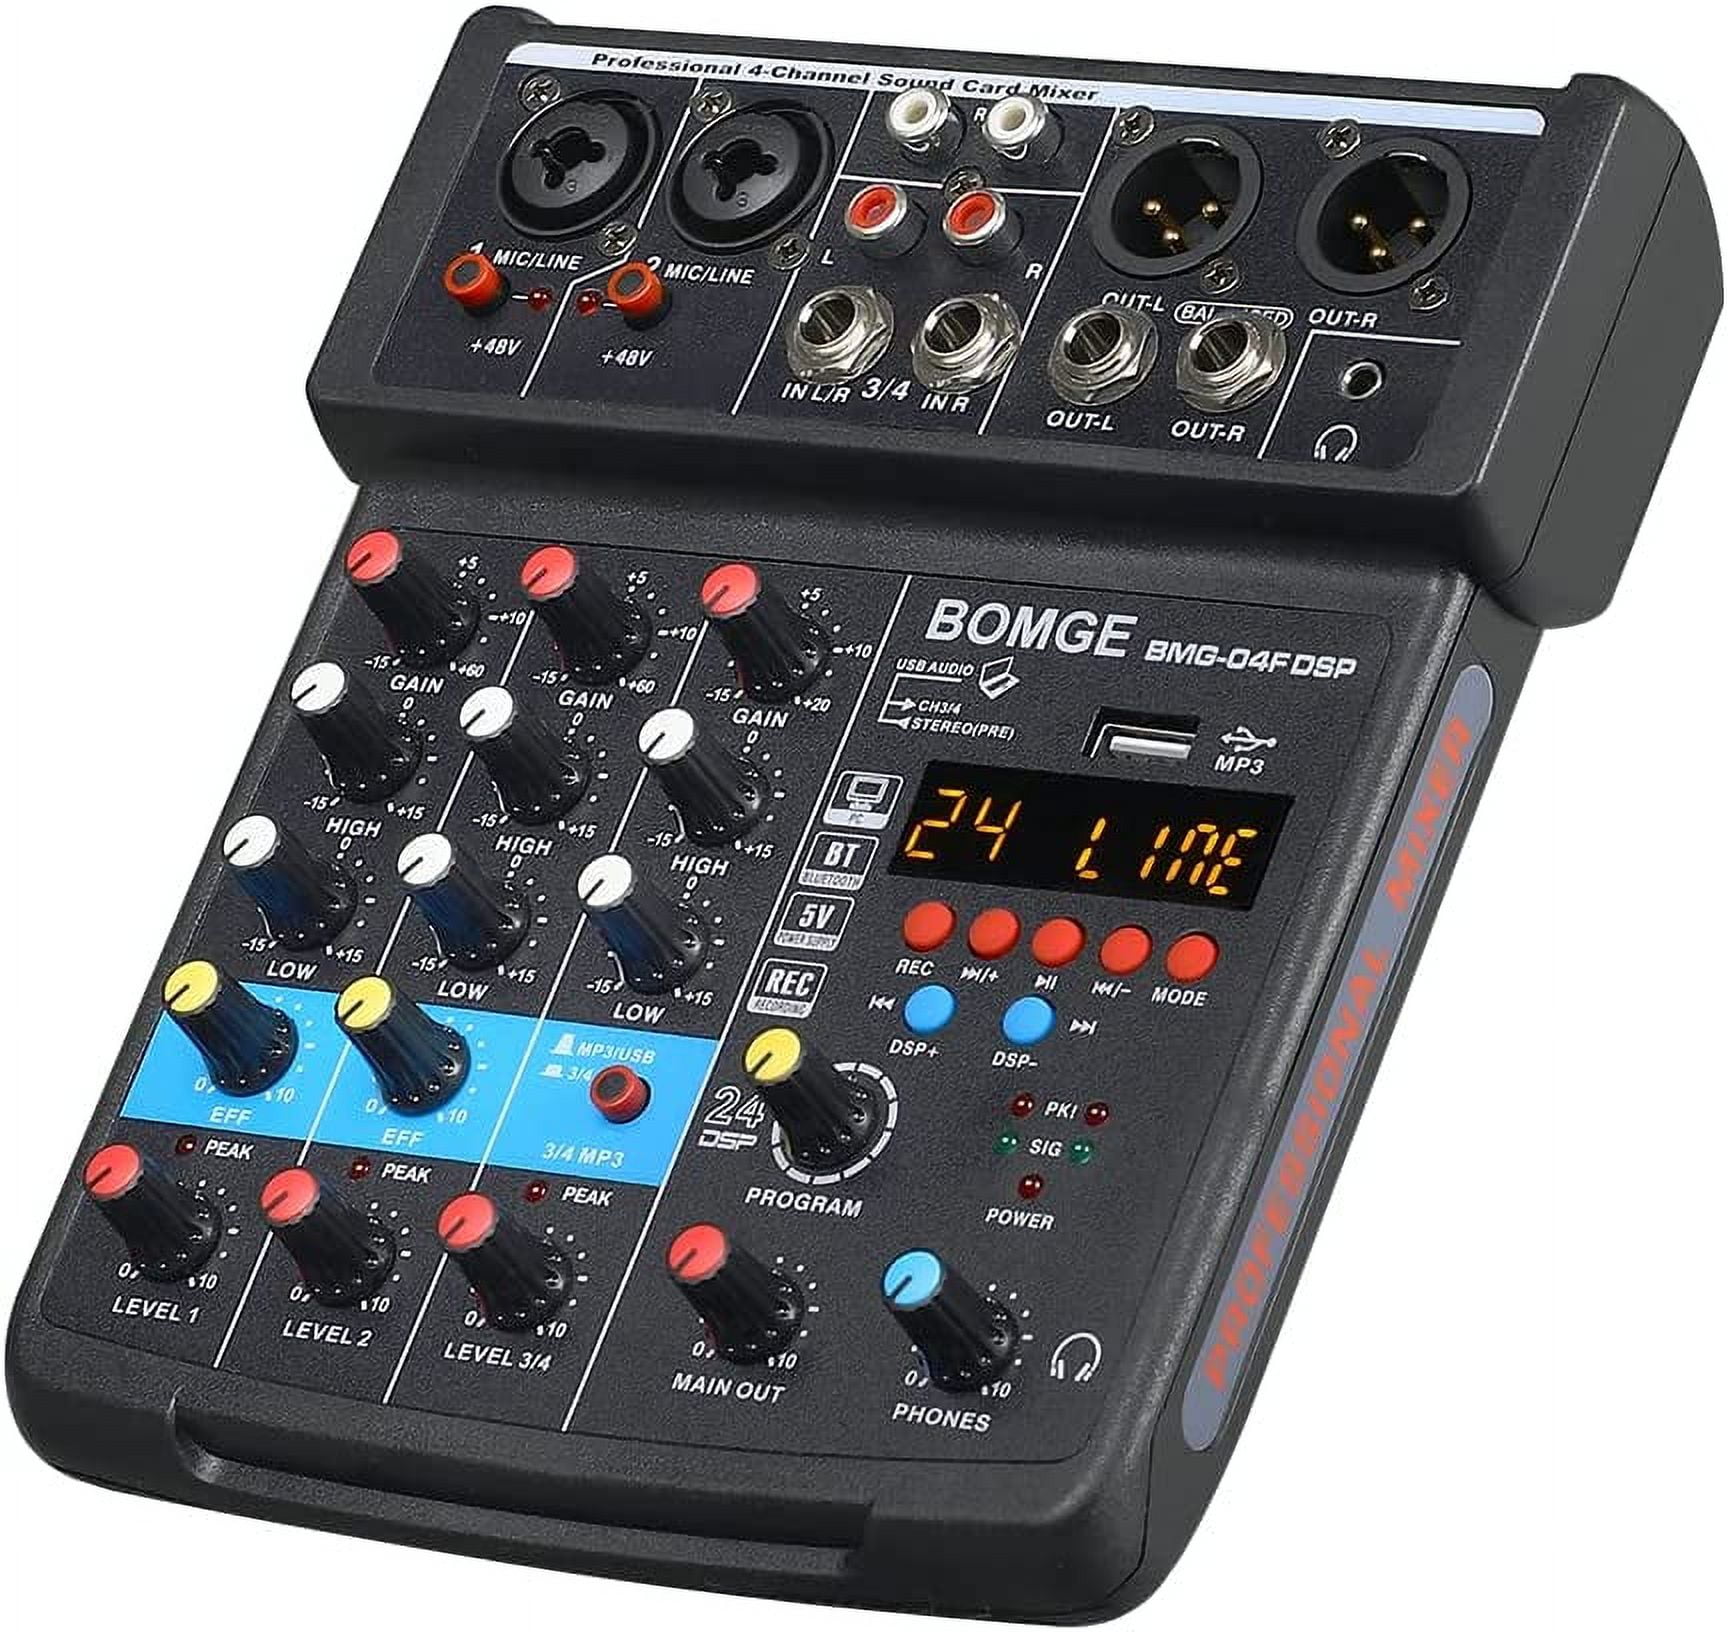 Portable sound card audio mixer 4 channel live streaming computer